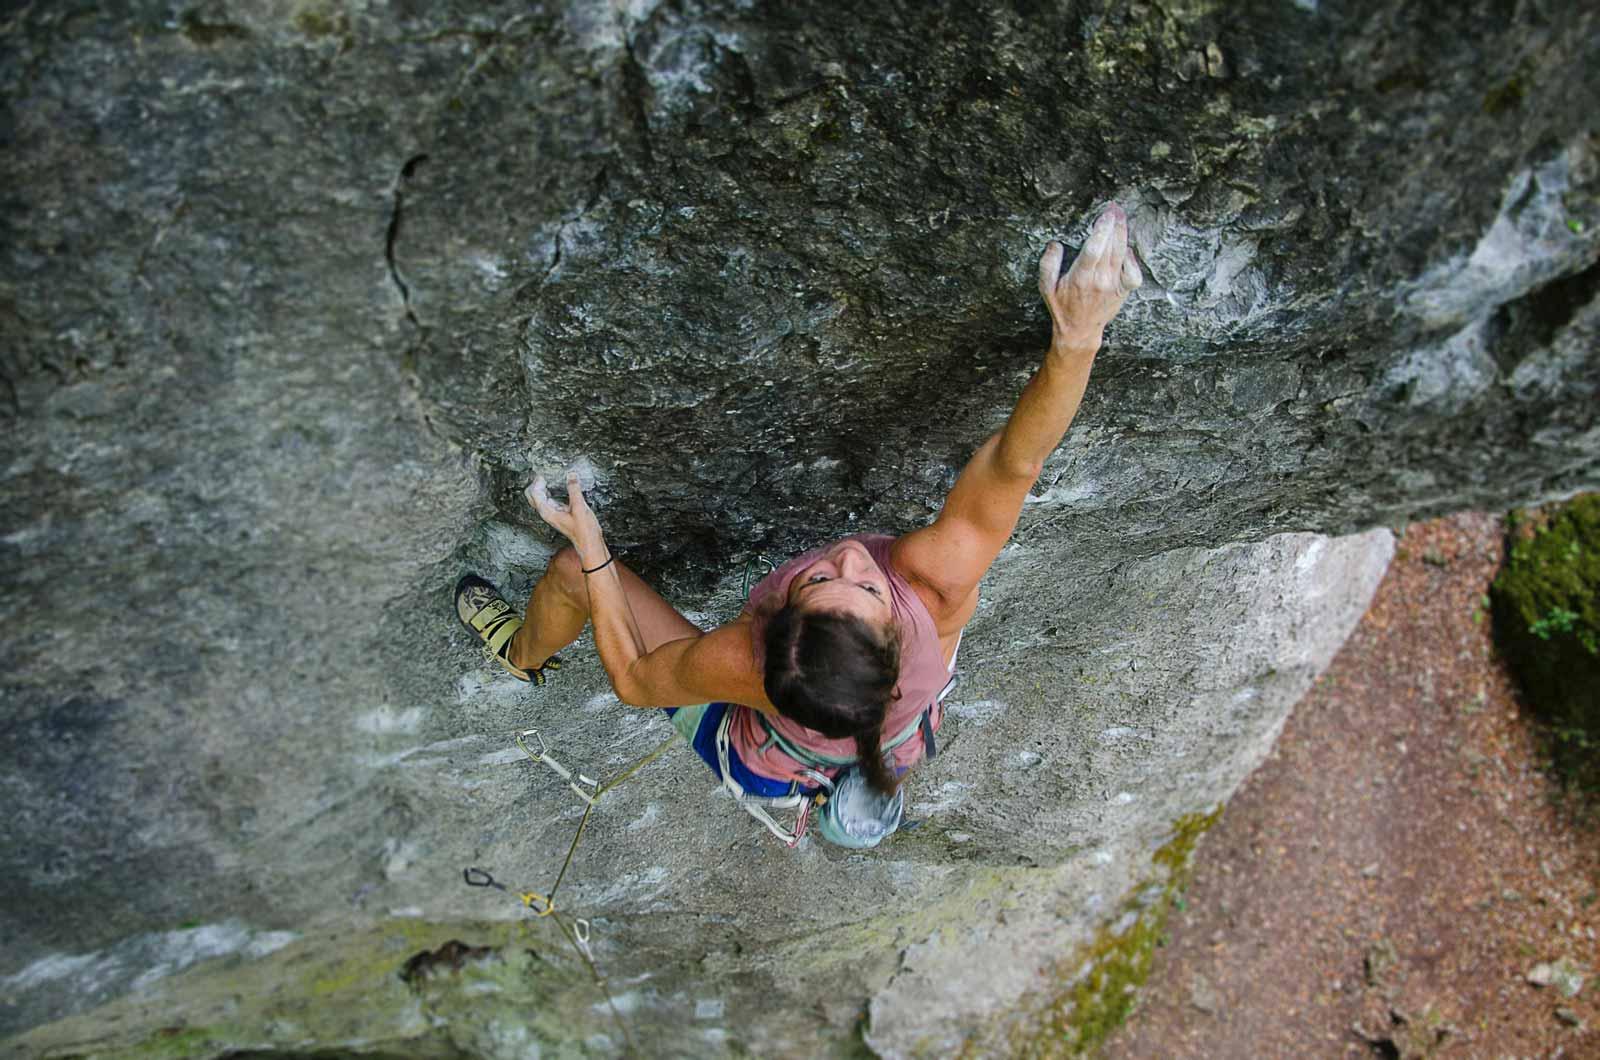 A rock climber climbing a wall outside from an aerial perspective